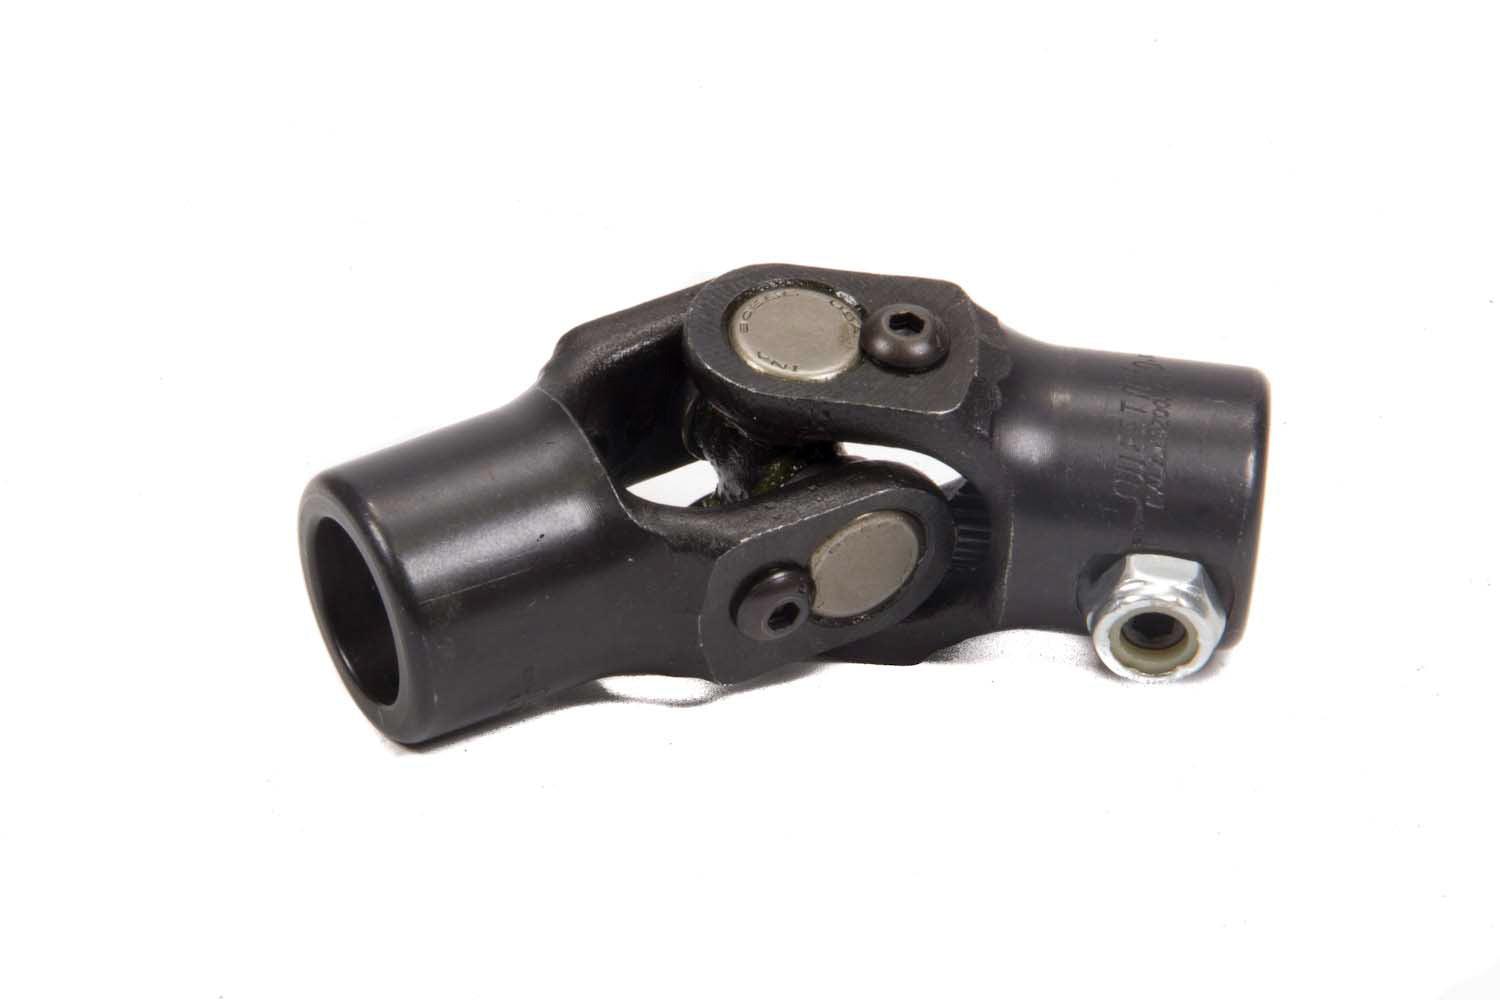 U-Joint 5/8 x 5/8 Smooth - Burlile Performance Products